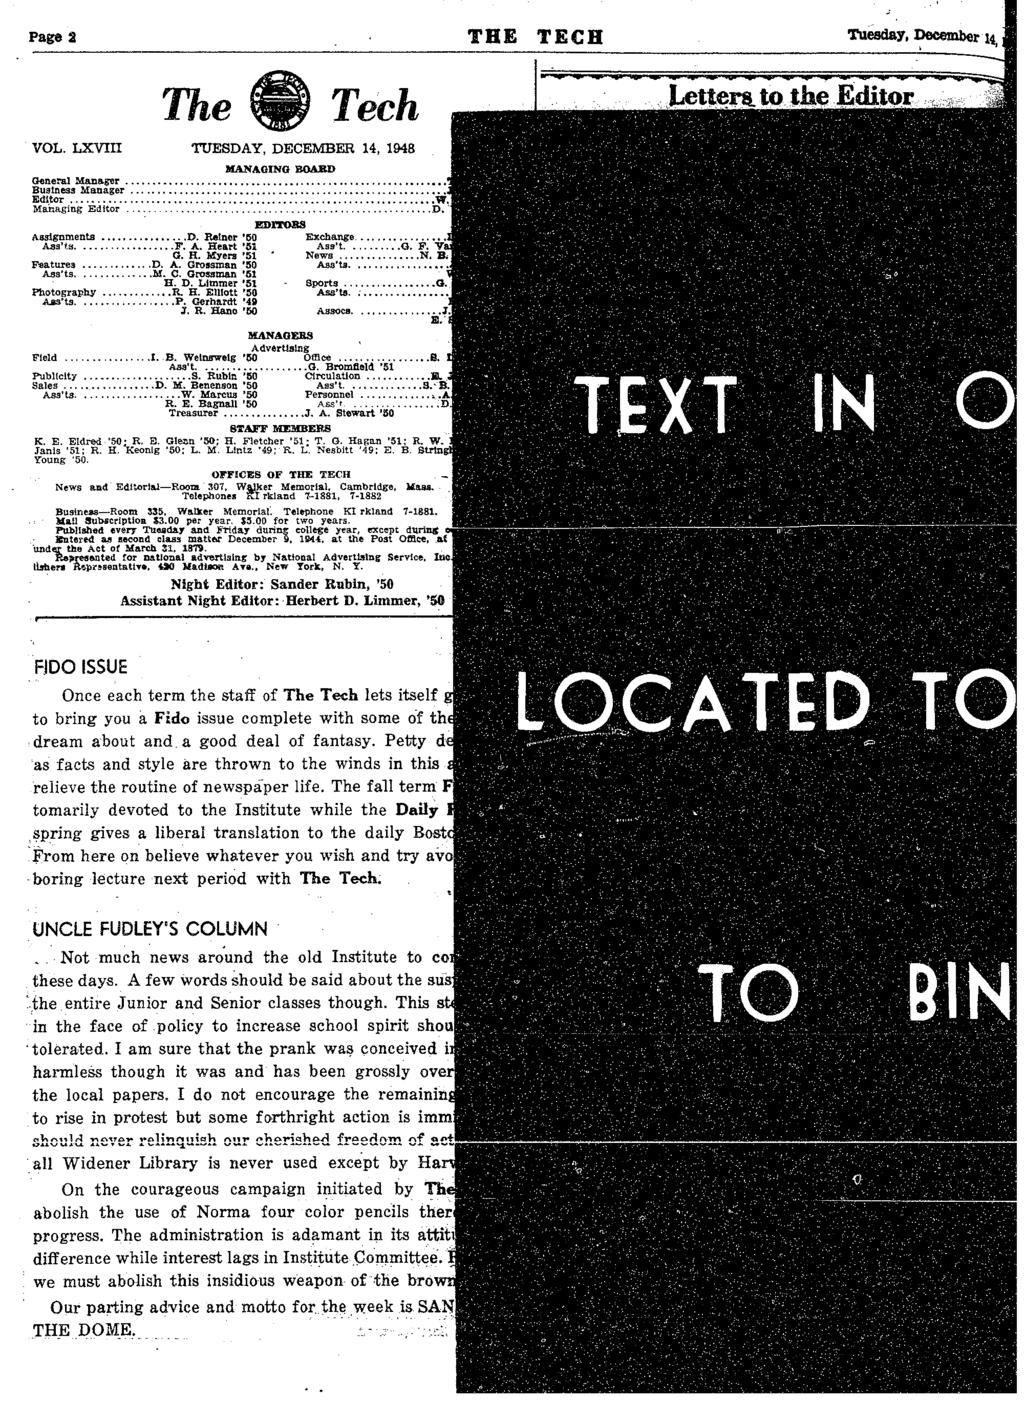 Page 2 The Tech VOL. LXV TUESDAY, DECEMBER 14, 1948 MANAGNG BOARD General Manager...... Busness Manager. Edtor. Managng... ;..W Edtor... D. EDTOR Assgnments... D. Rener '650 Exchange.. Ass'ts... F. A. Heart '51 Ass't.